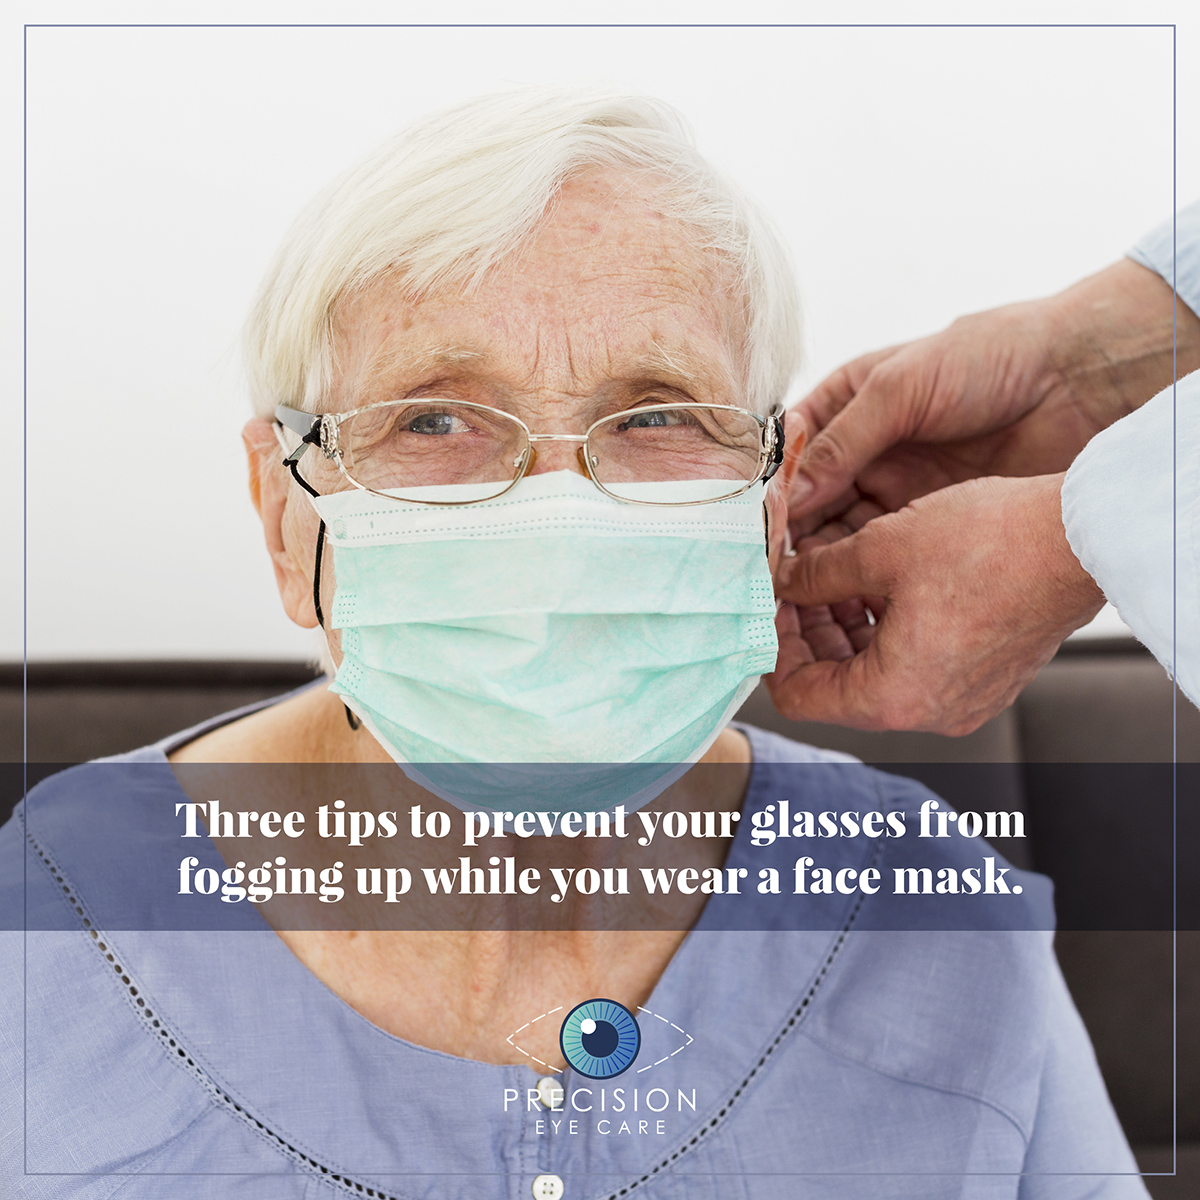 Three tips to prevent your glasses from fogging up while you wear a face mask.